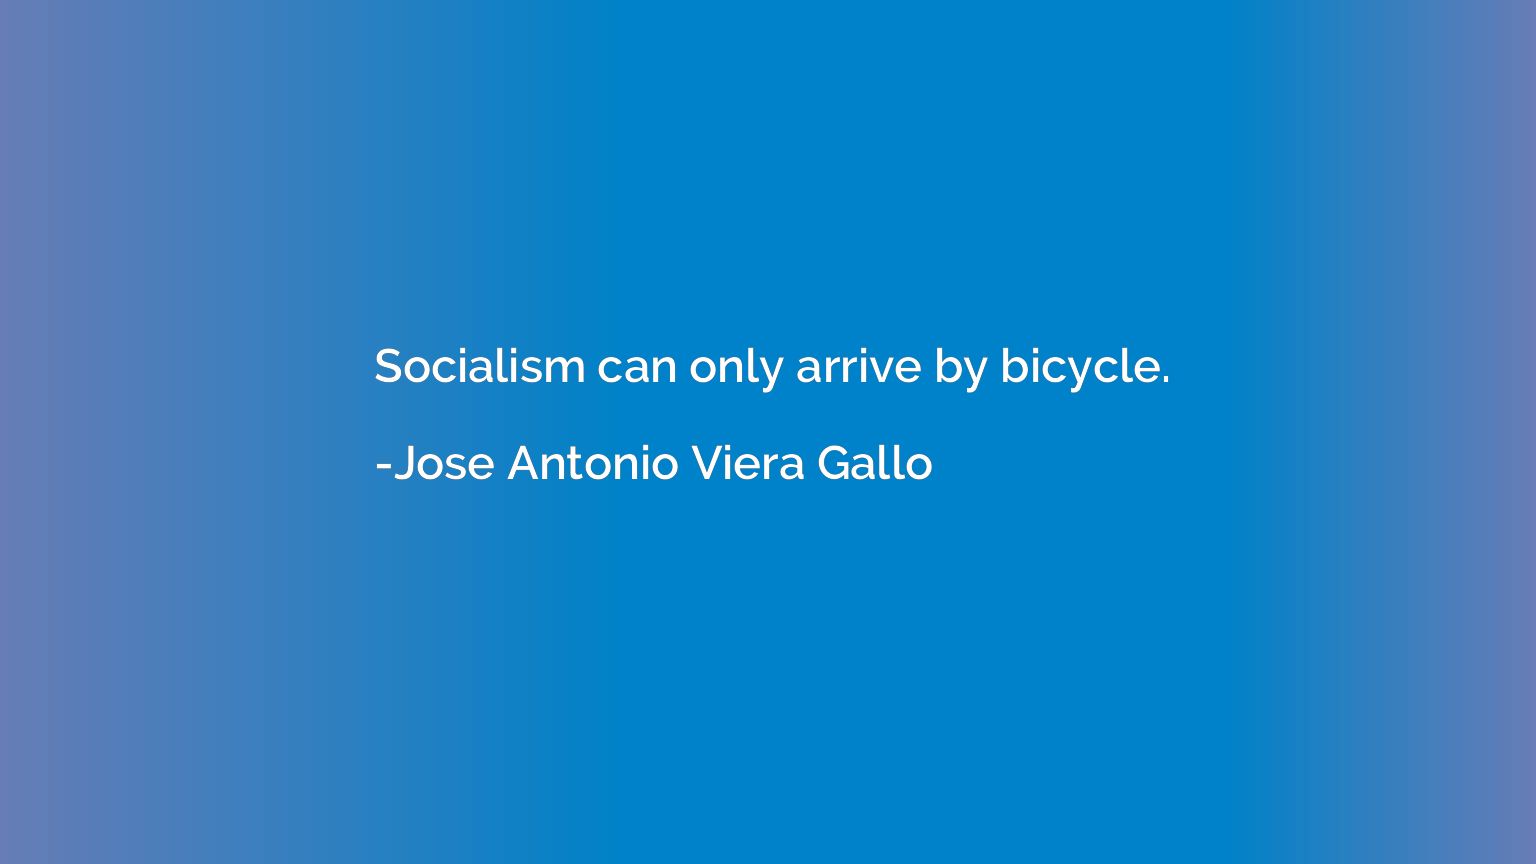 Socialism can only arrive by bicycle.